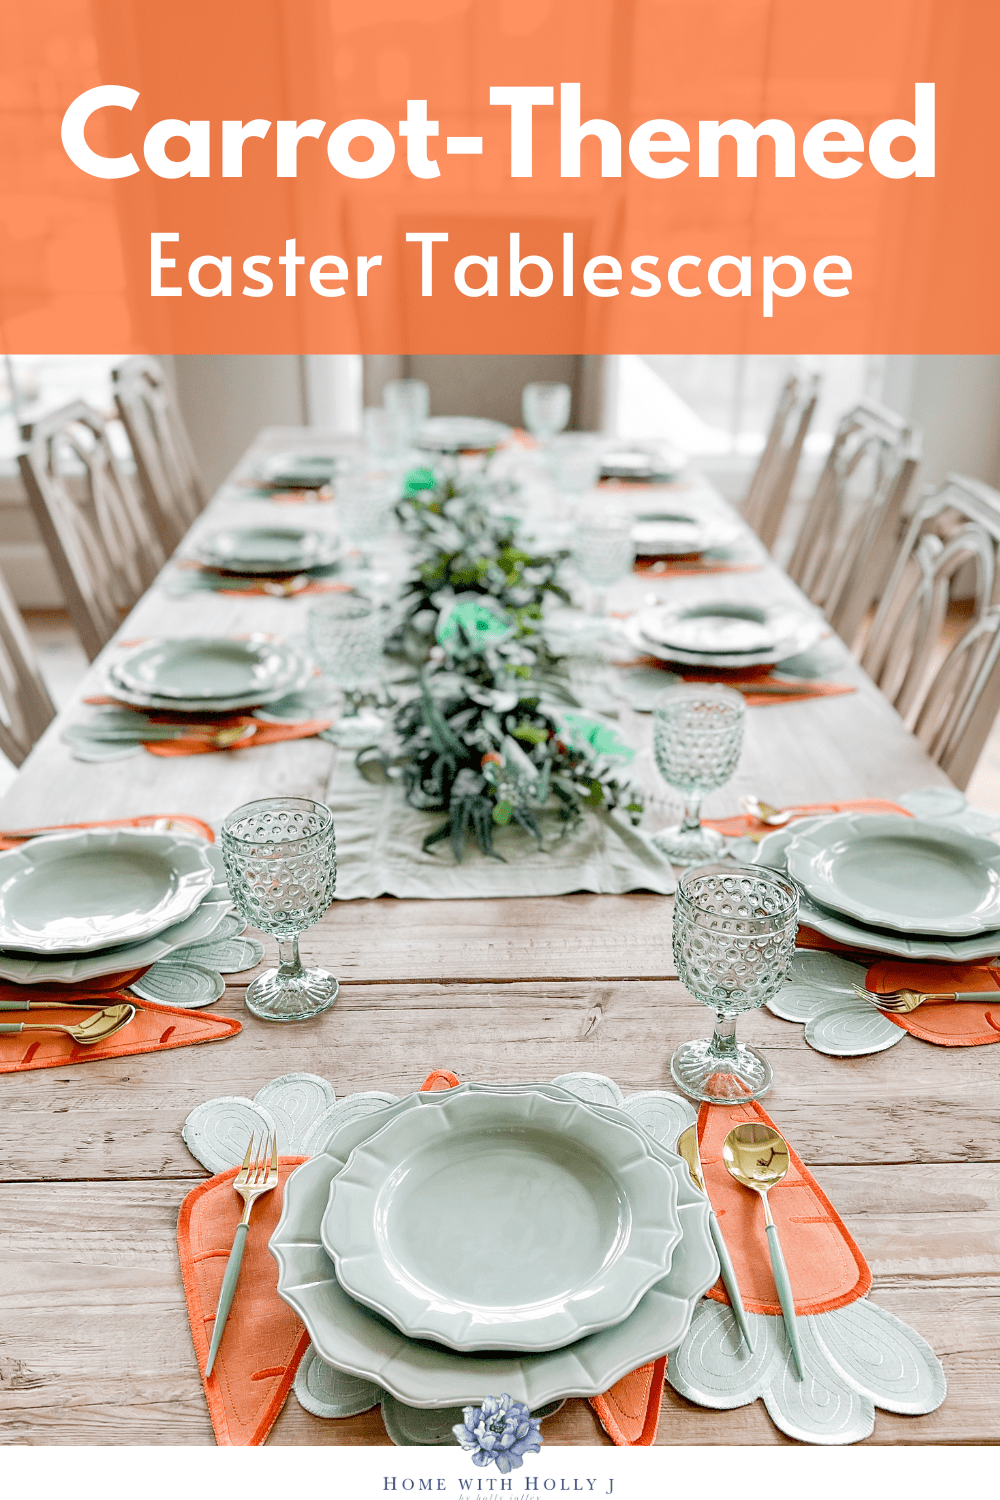 Create the perfect Easter tablescape for your next party with this easy and festive carrot-themed tablescape. From the placemats to the floral garland and delicious chocolate carrots, you'll have everything you need for your unique Easter celebration.